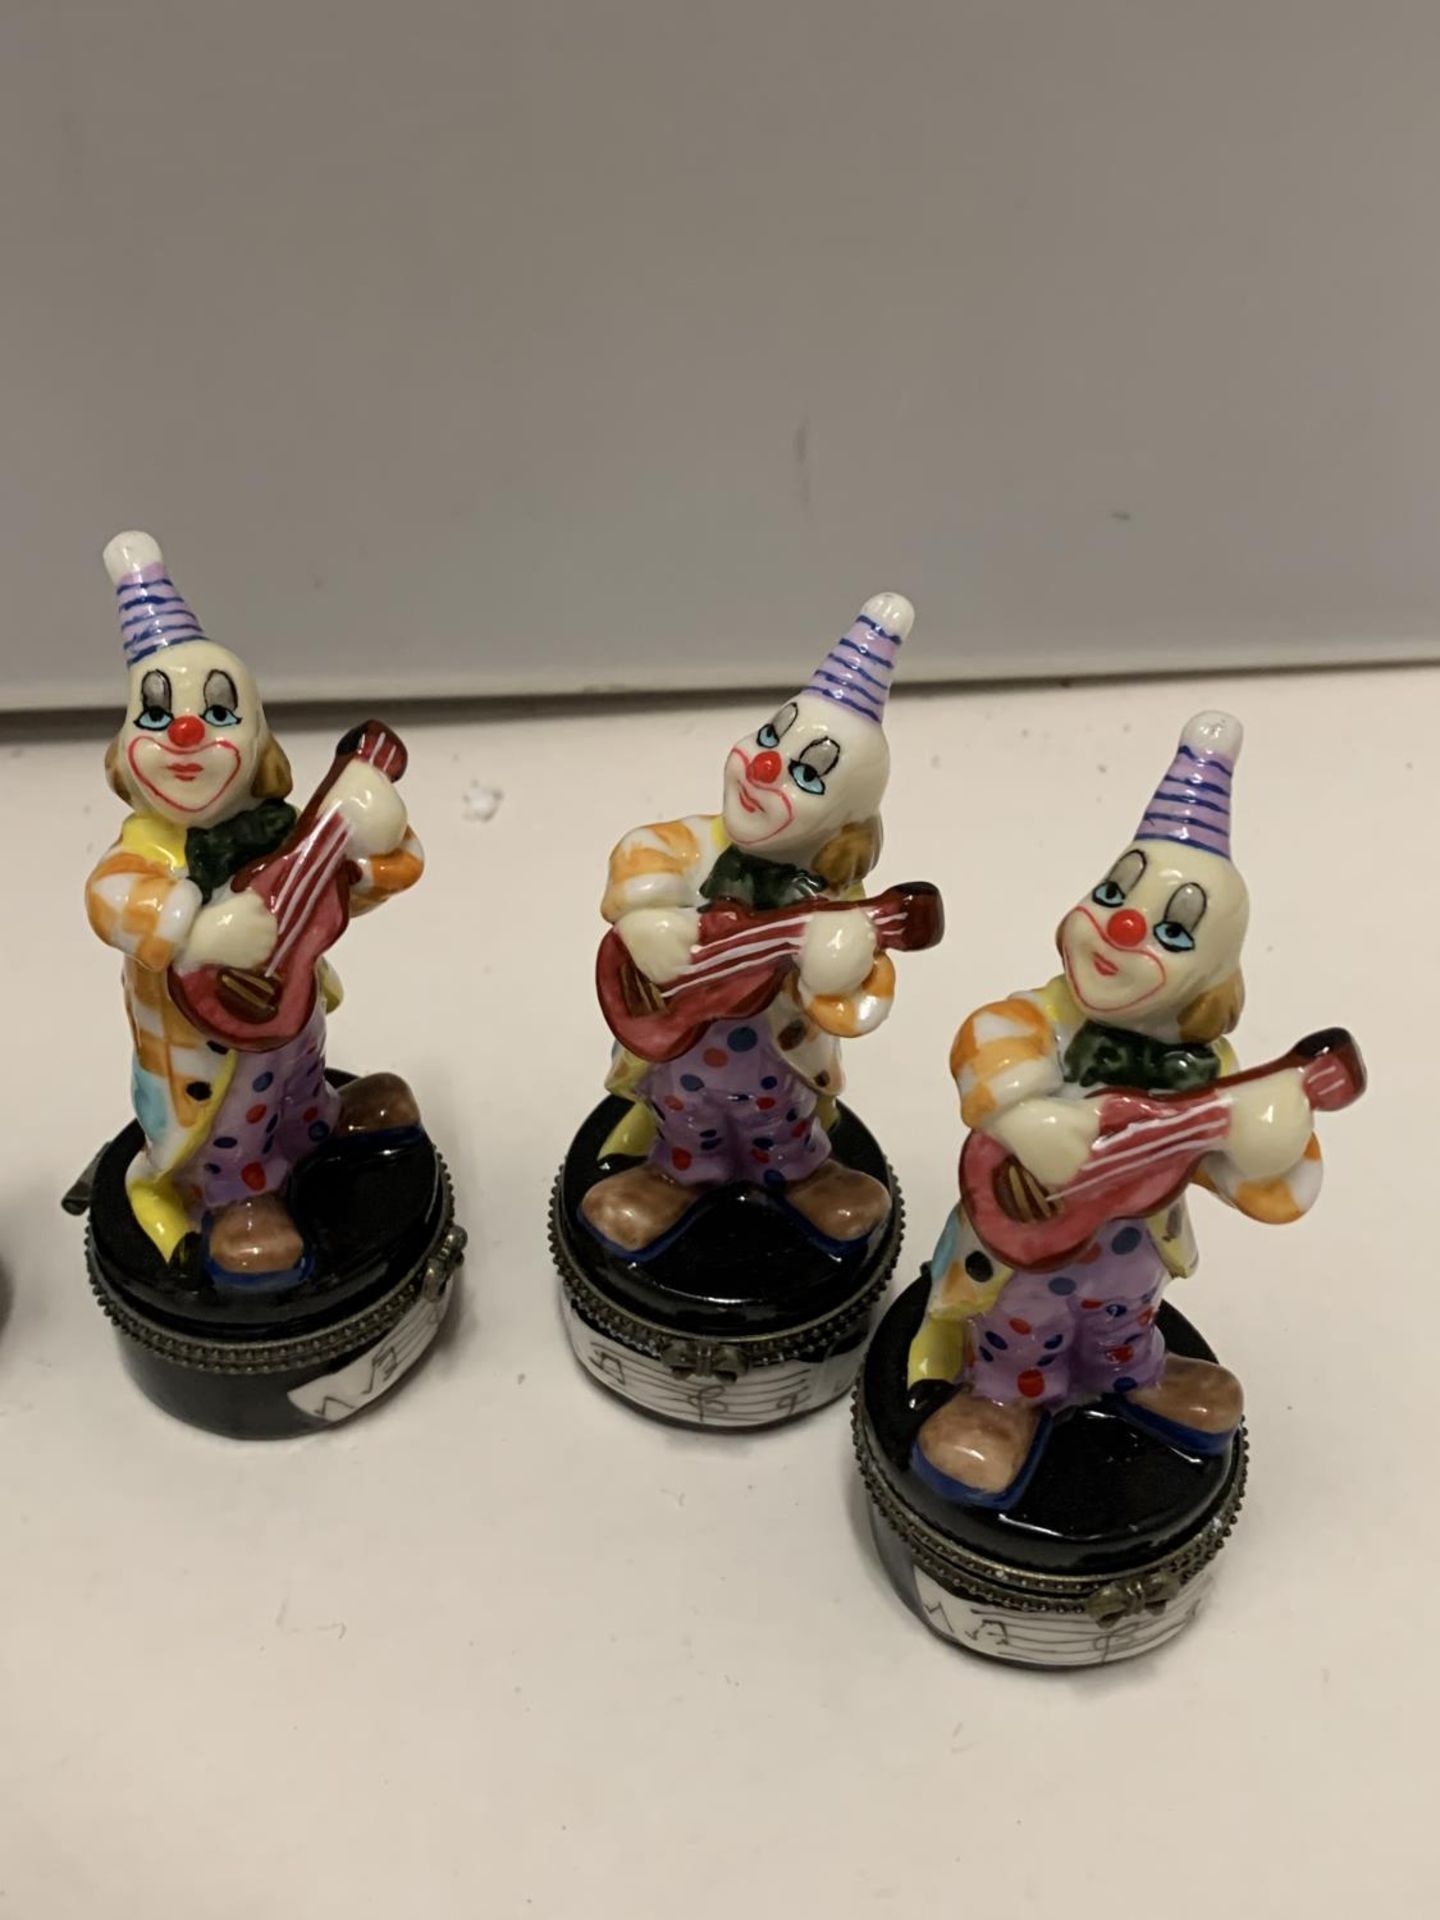 SIX TRINKET BOXES EACH WITH A GLASS CLOWN PLAYING GUITAR FIGURE - Image 2 of 3